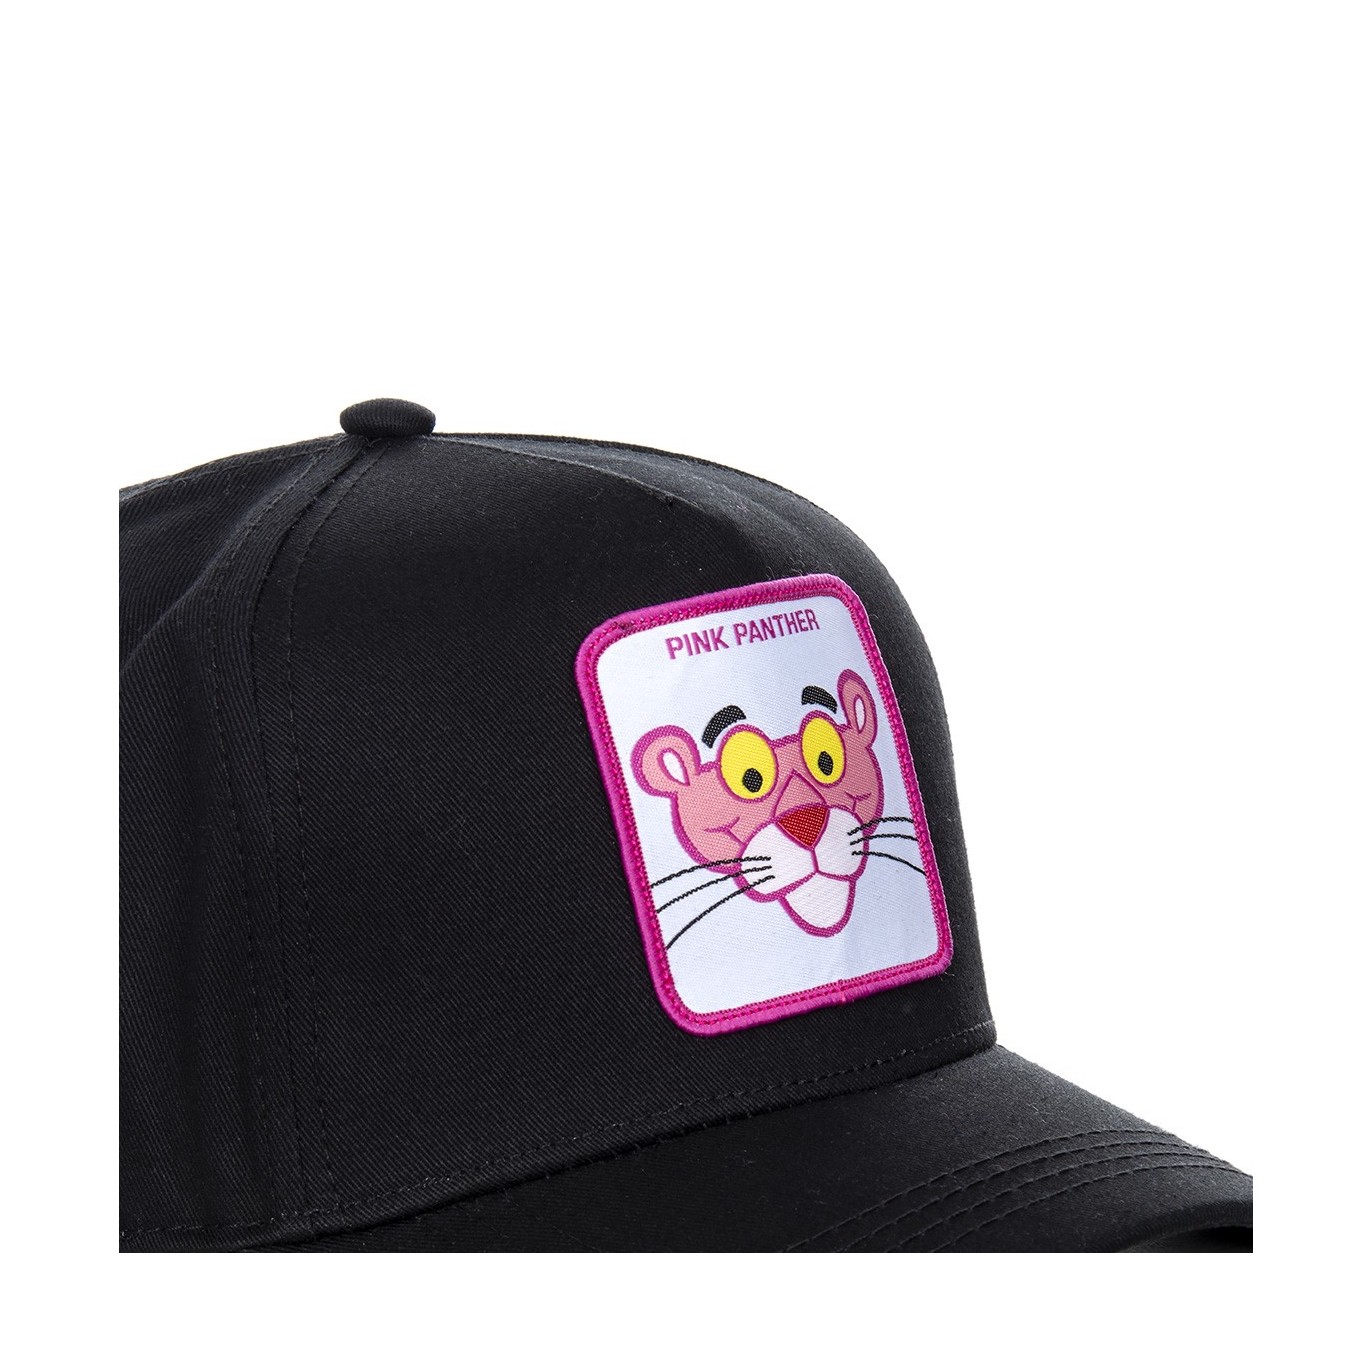 Casquette Capslab Pink Panther Panthere Rose Noir Capslab - 3